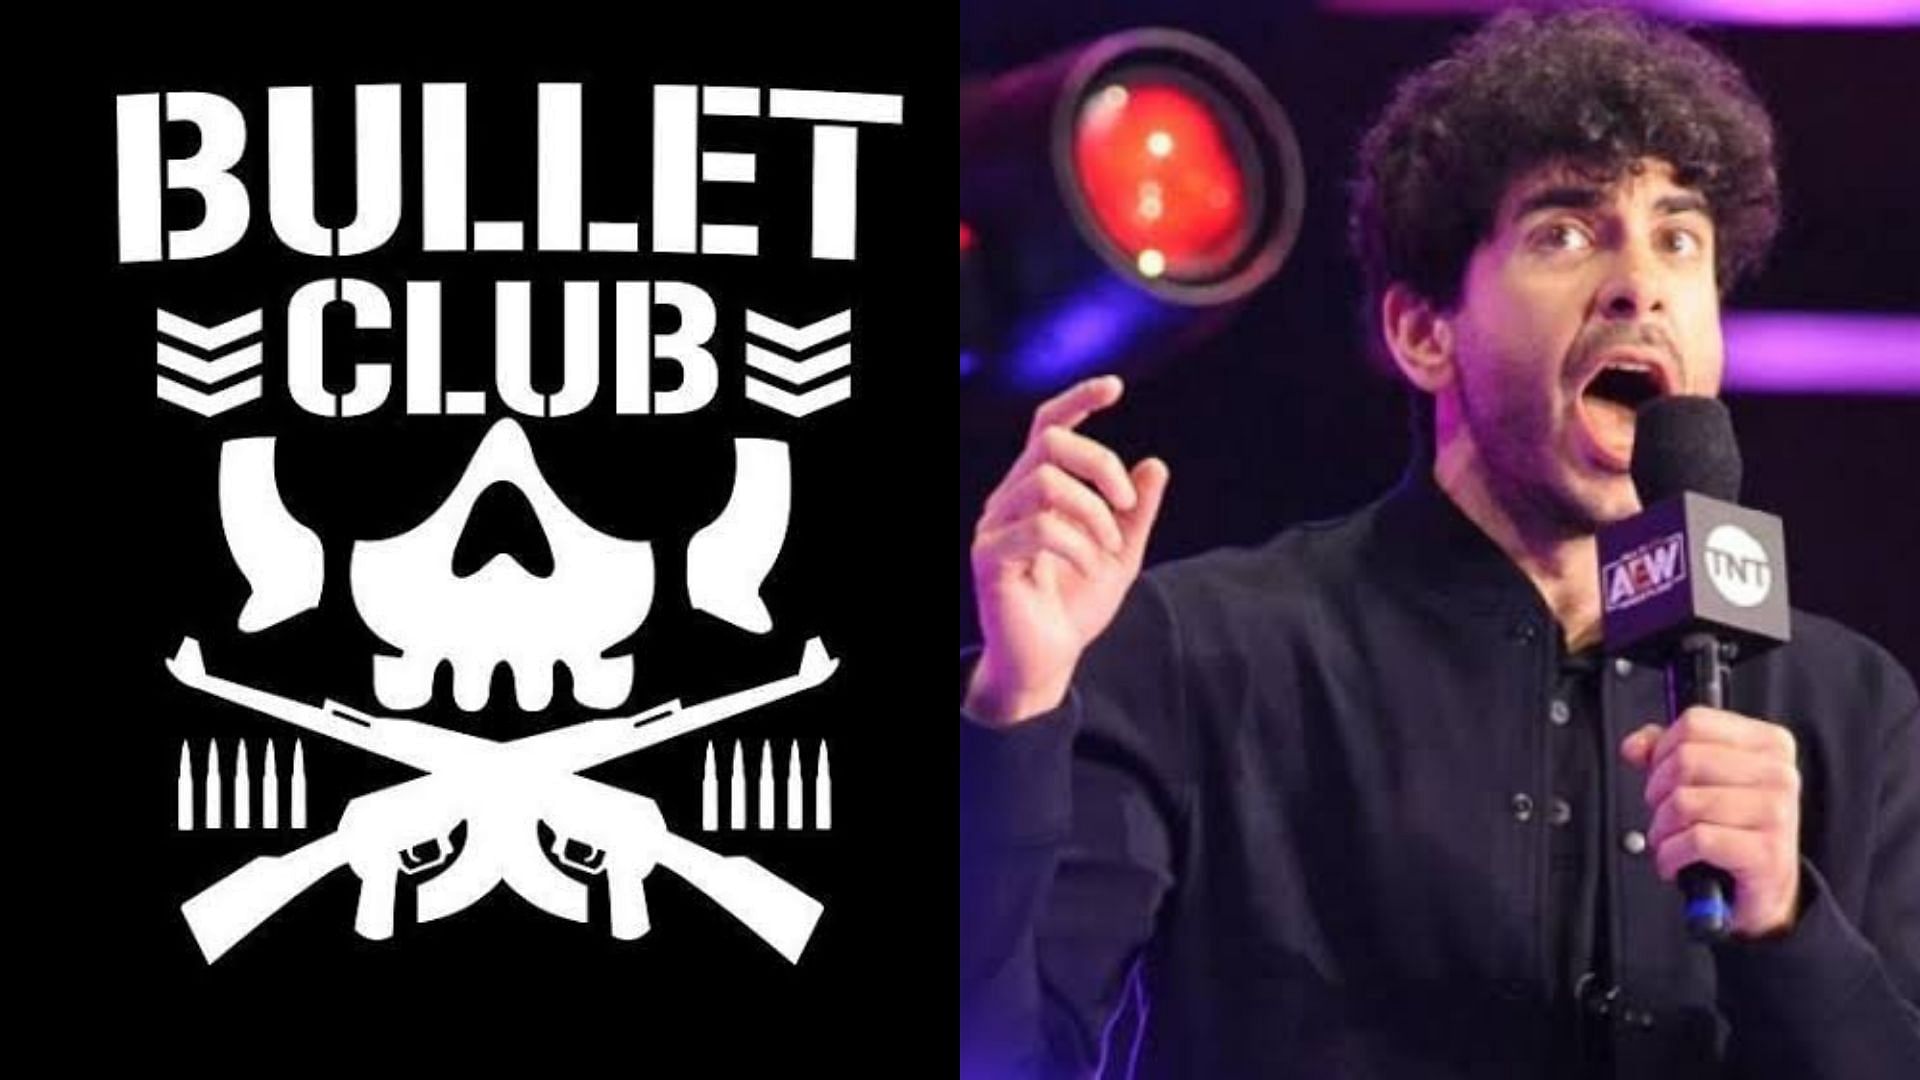 Tony Khan has been put on notice by a former Bullet Club star who recently pinned Wheeler Yuta in NJPW